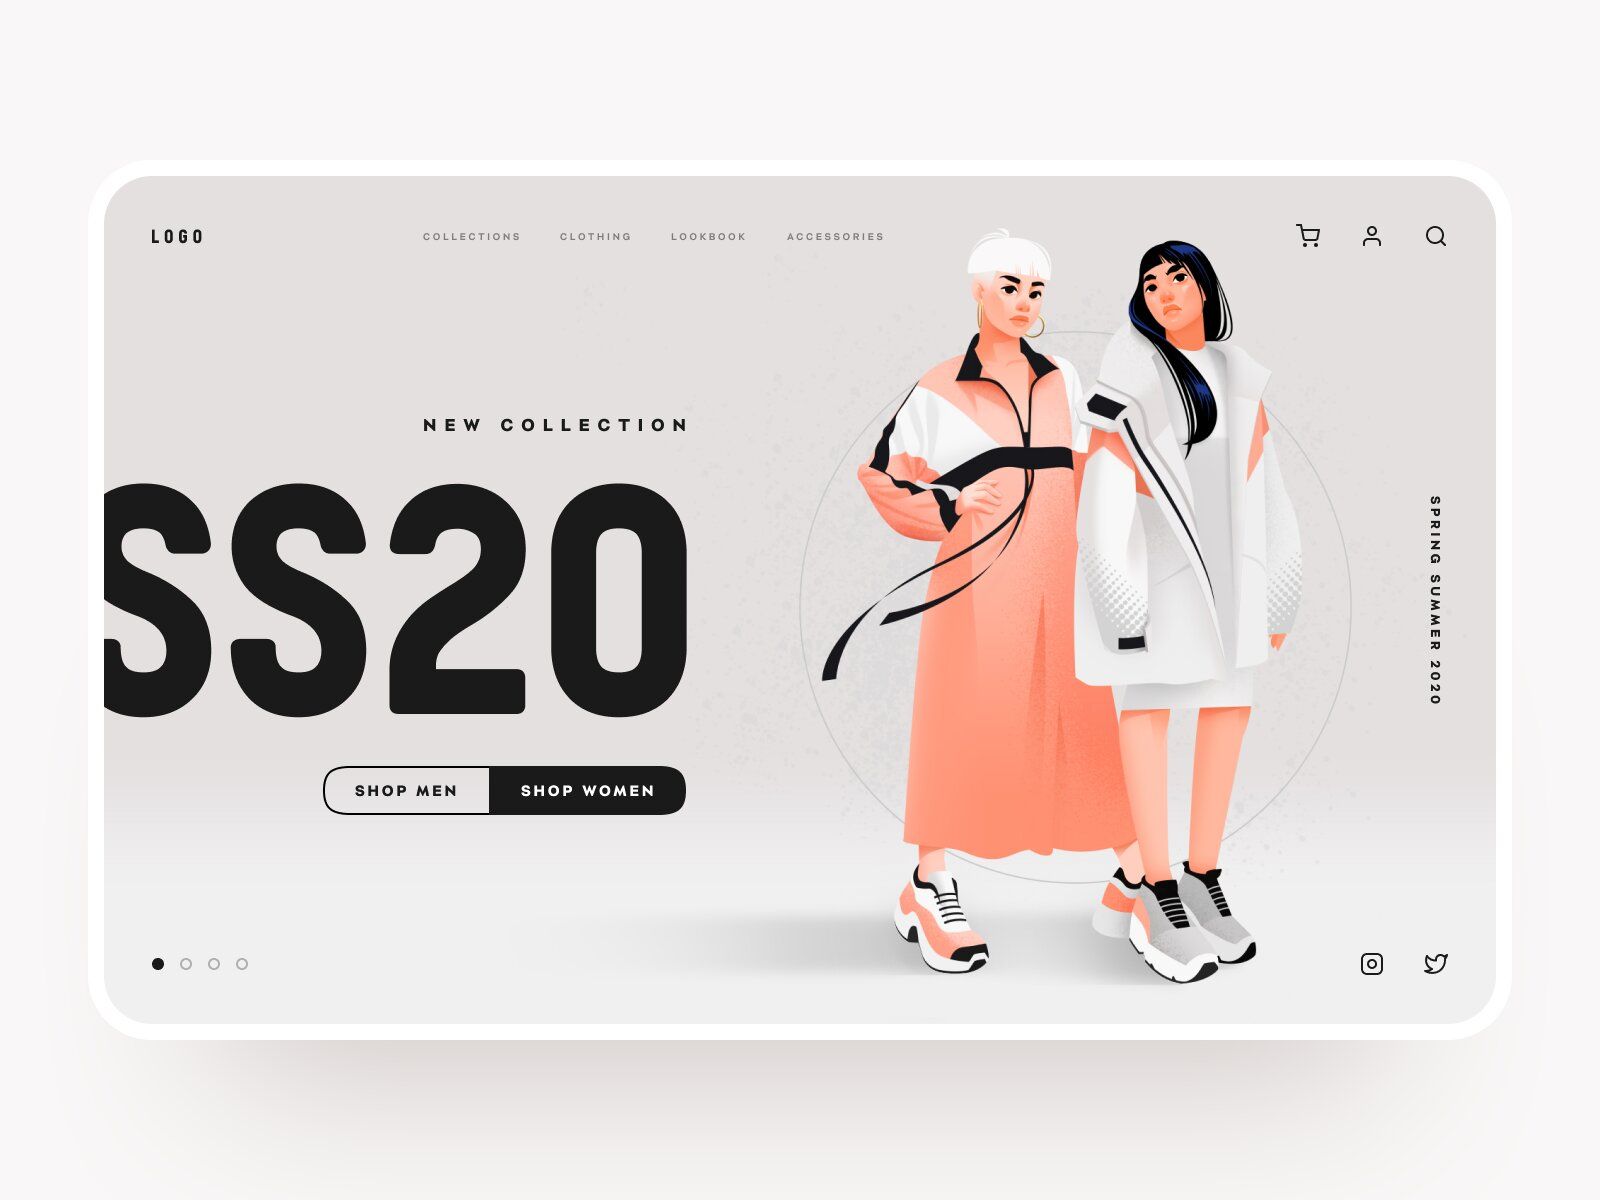 eCommerce website for clothes (*image by [Shakuro](https://dribbble.com/shakuro){ rel="nofollow" target="_blank" .default-md}*)